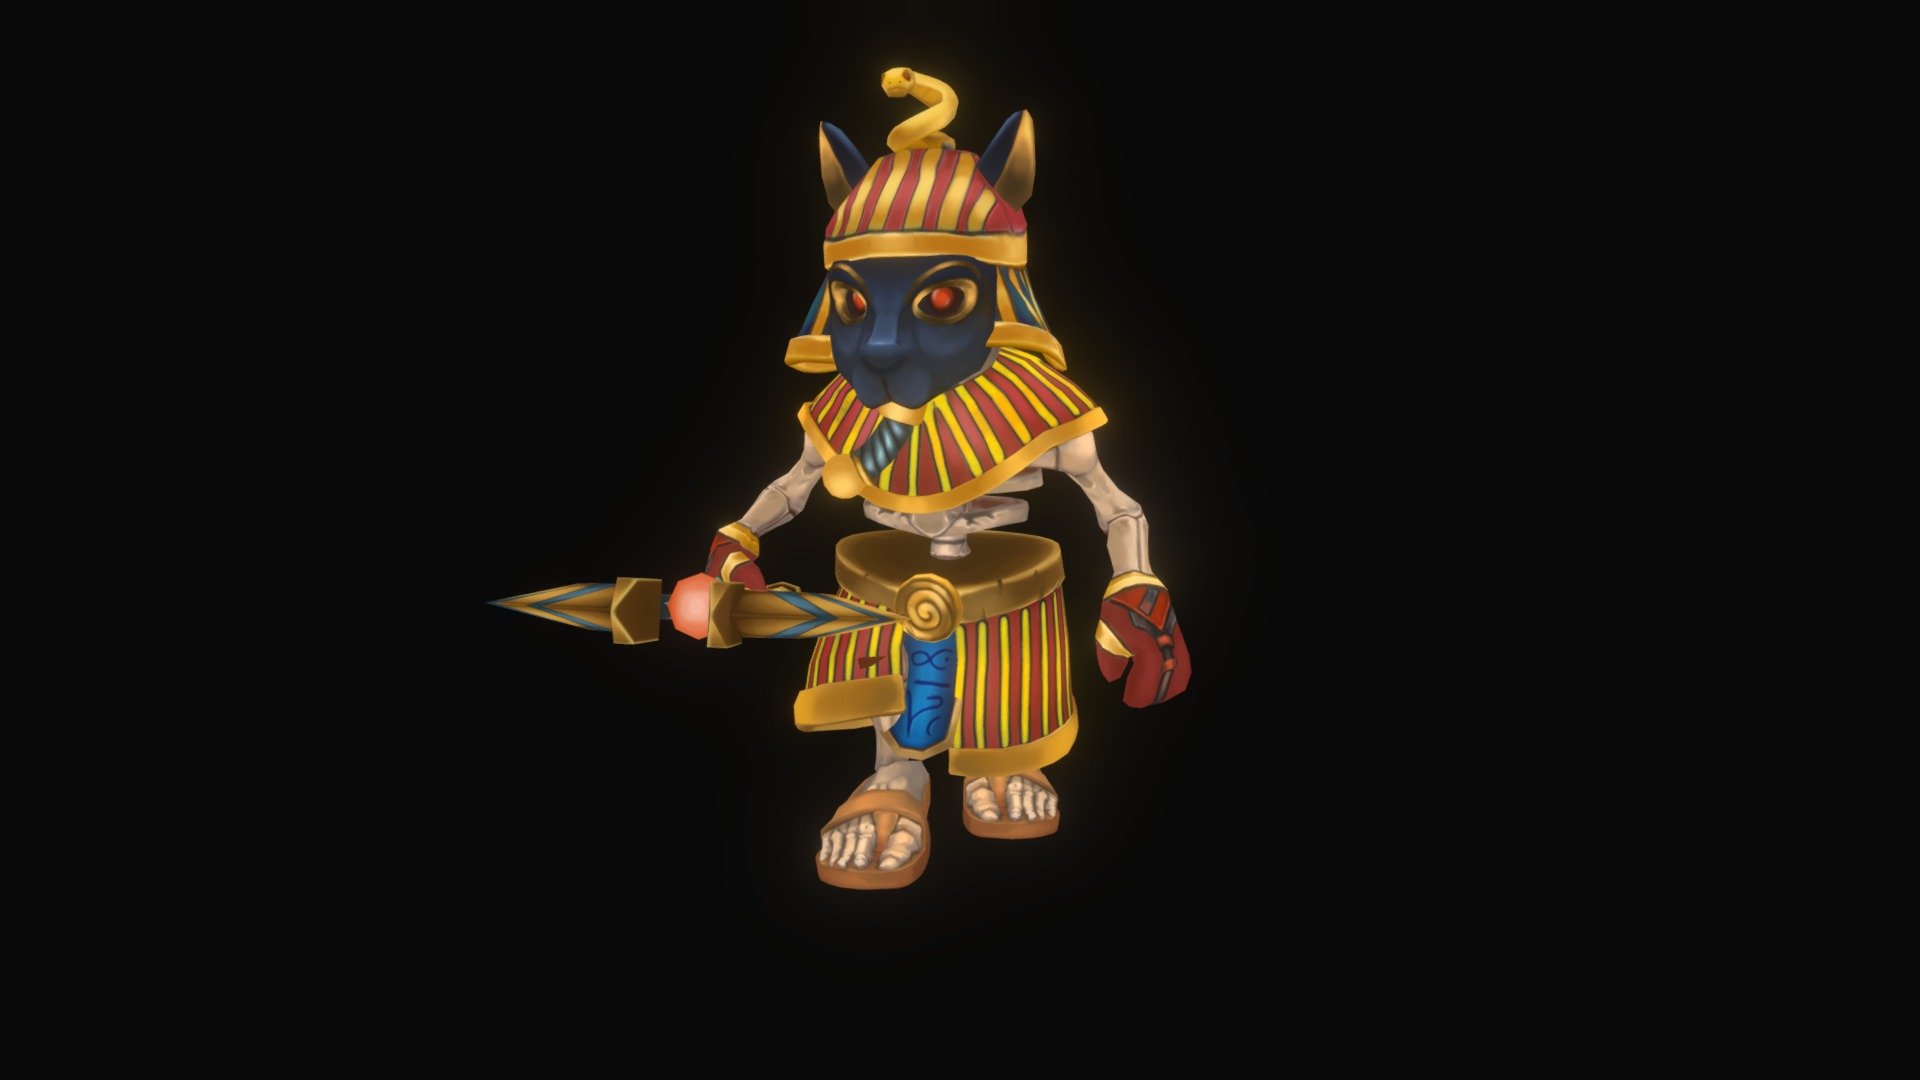 Egypt Minion pack that i made for Unity Asset Store - Egypt Minion 2 - 3D model by Serhat Yucekaya (@serribaba) 3d model